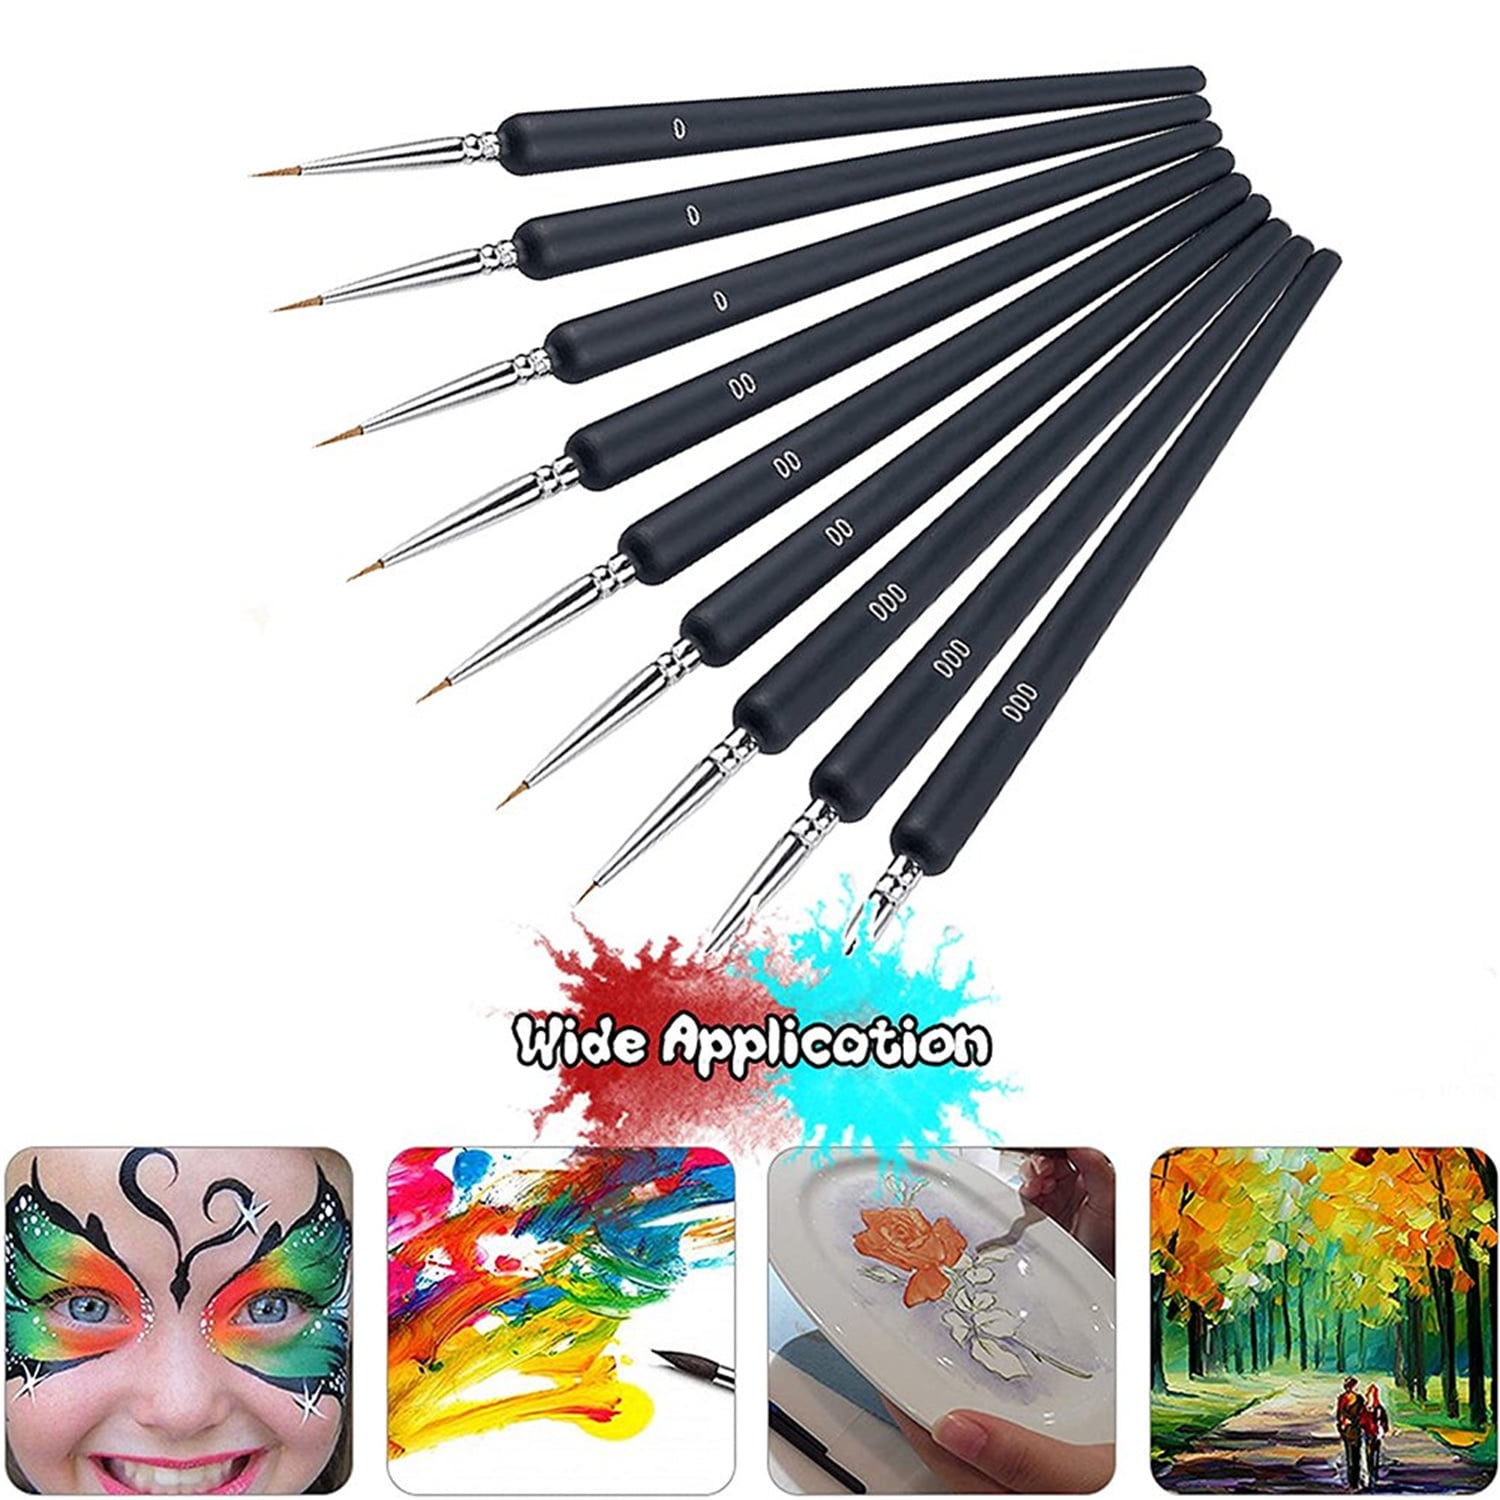 Buy Art Supplies, Deluxe Art Set Drawing Supplies in Portable Wooden Case,  Art Kit for Beginners with Crayons, Colored Pencils, Watercolor Power, Oil  Pastels, Sketch Pad Online at desertcartINDIA